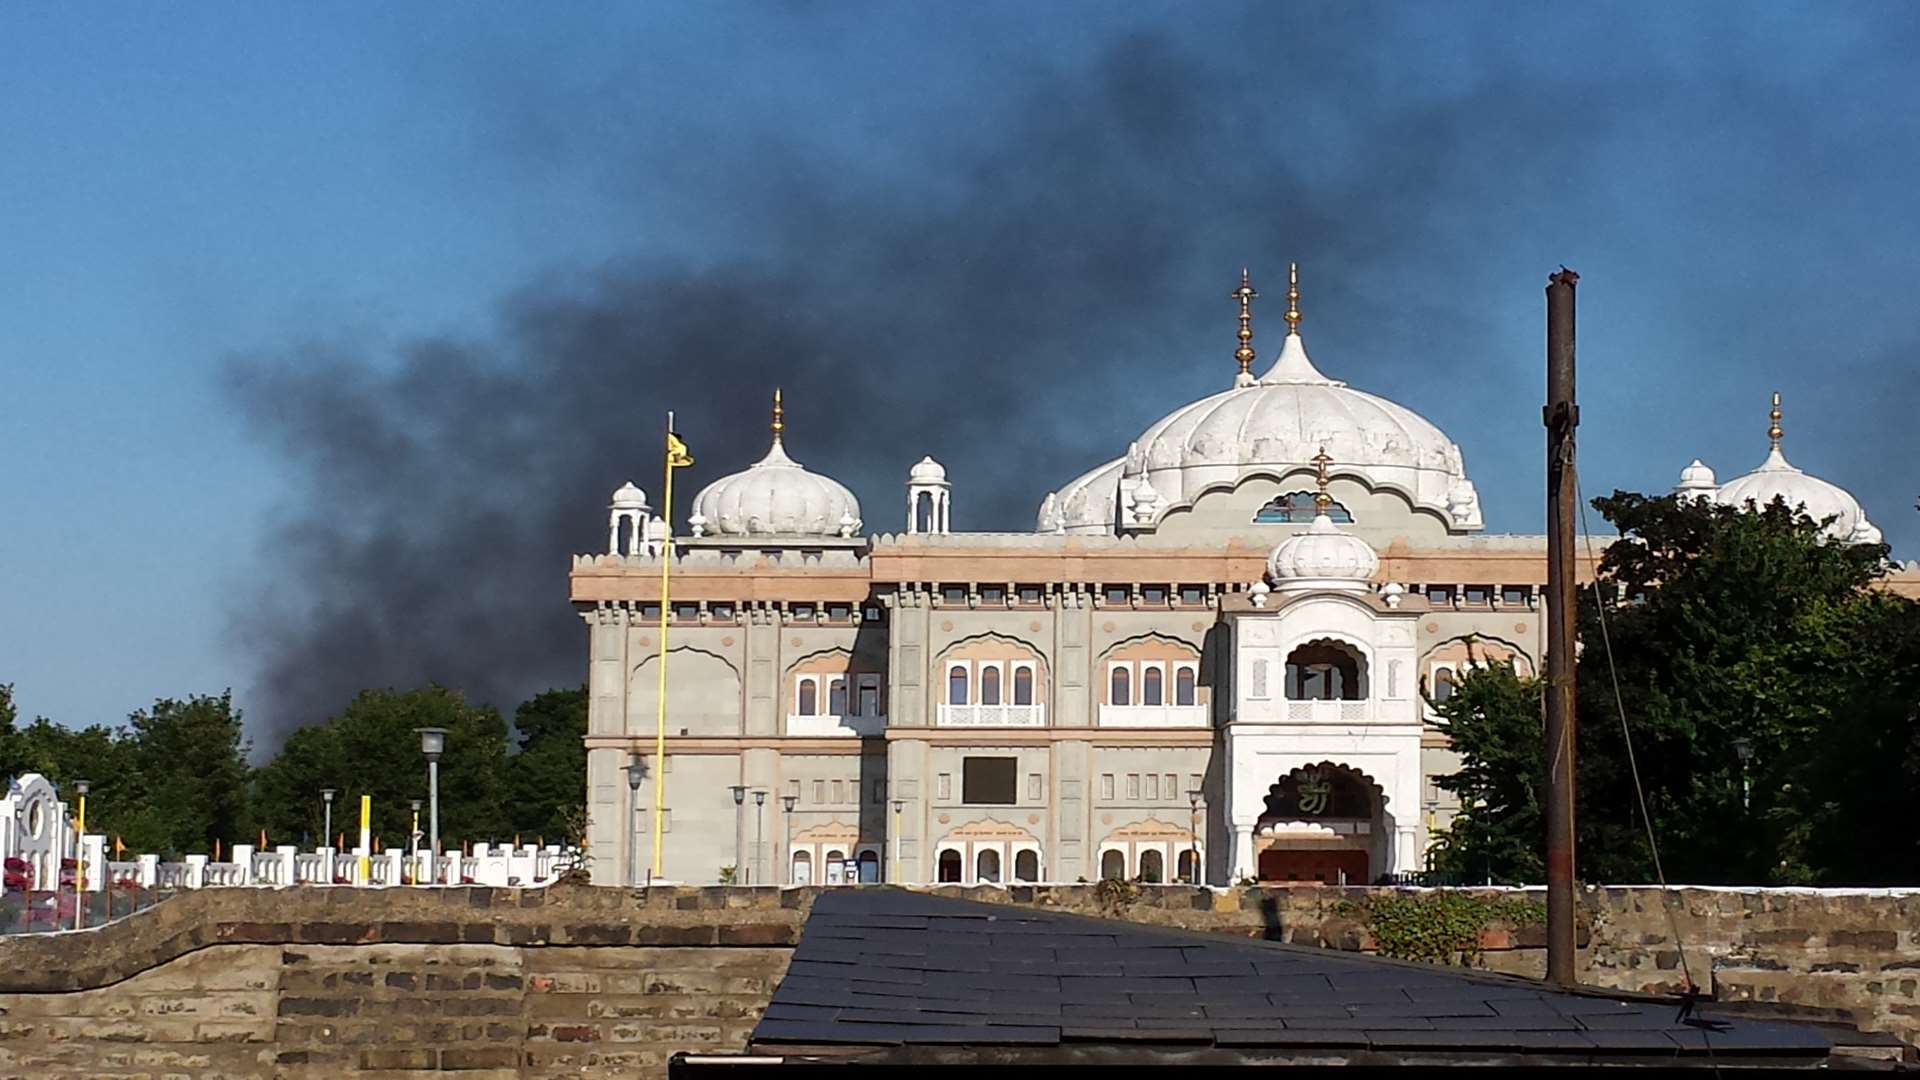 Smoke could be seen billowing up from beyond the gurdwara